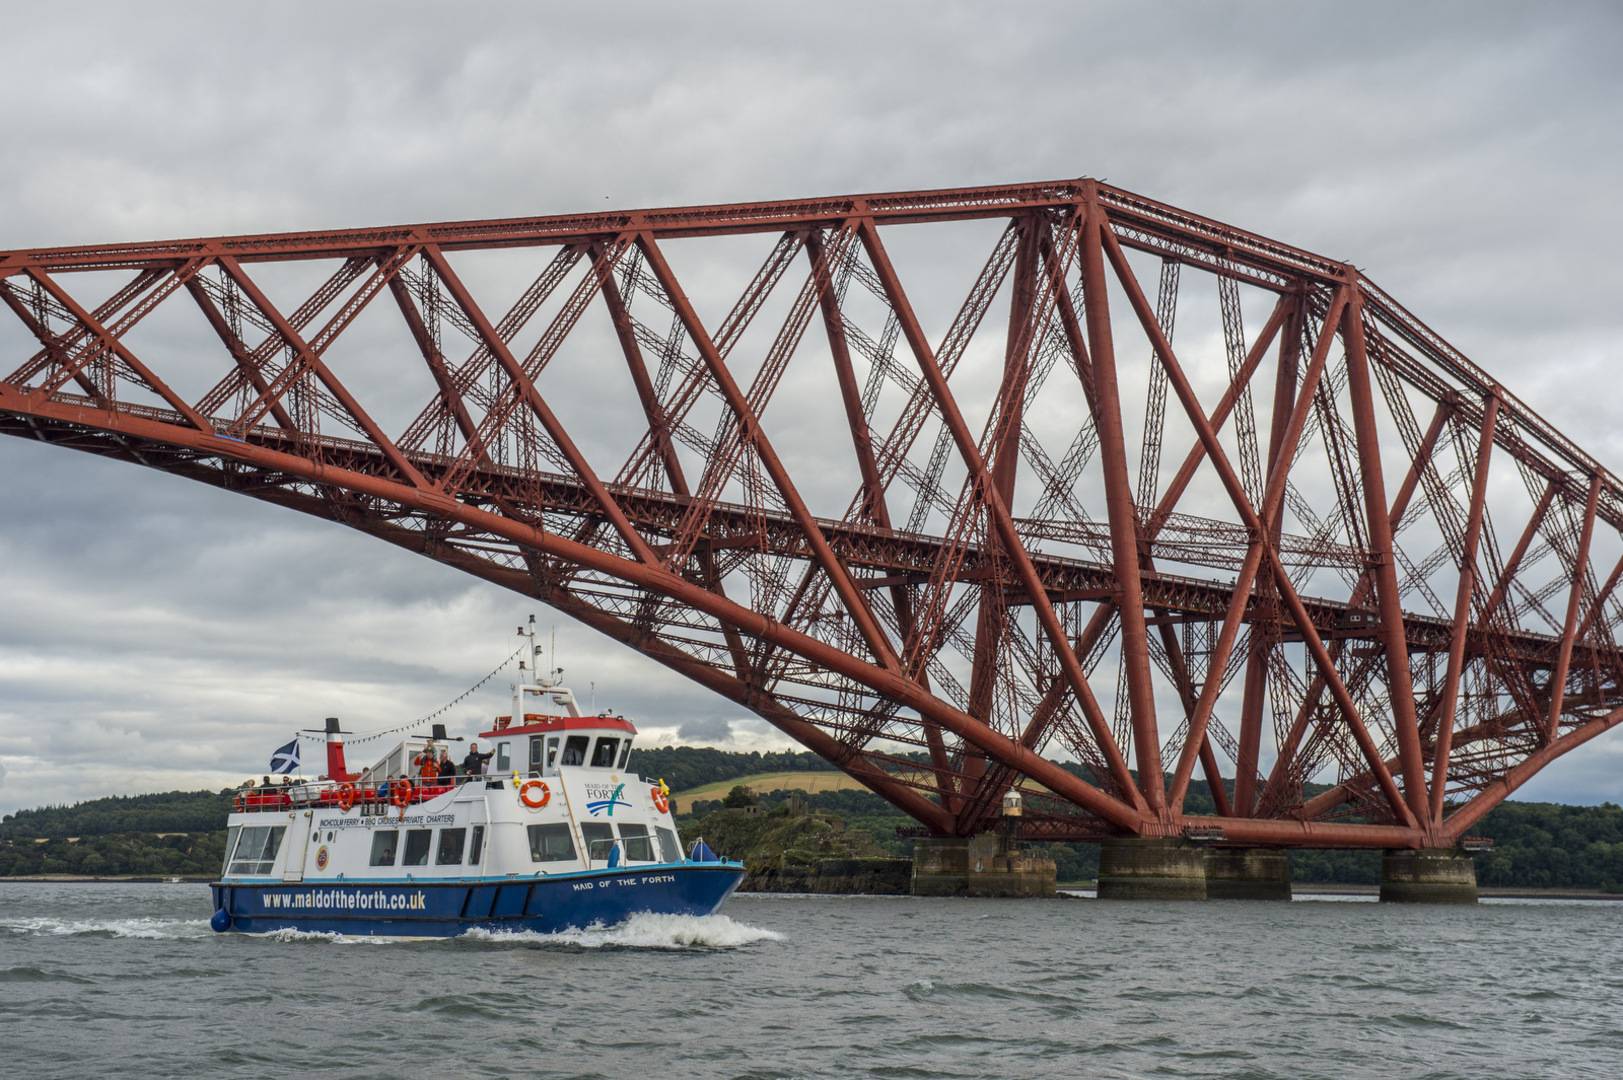 The Maid of the Forth sailing in front of the Forth Rail Bridge.